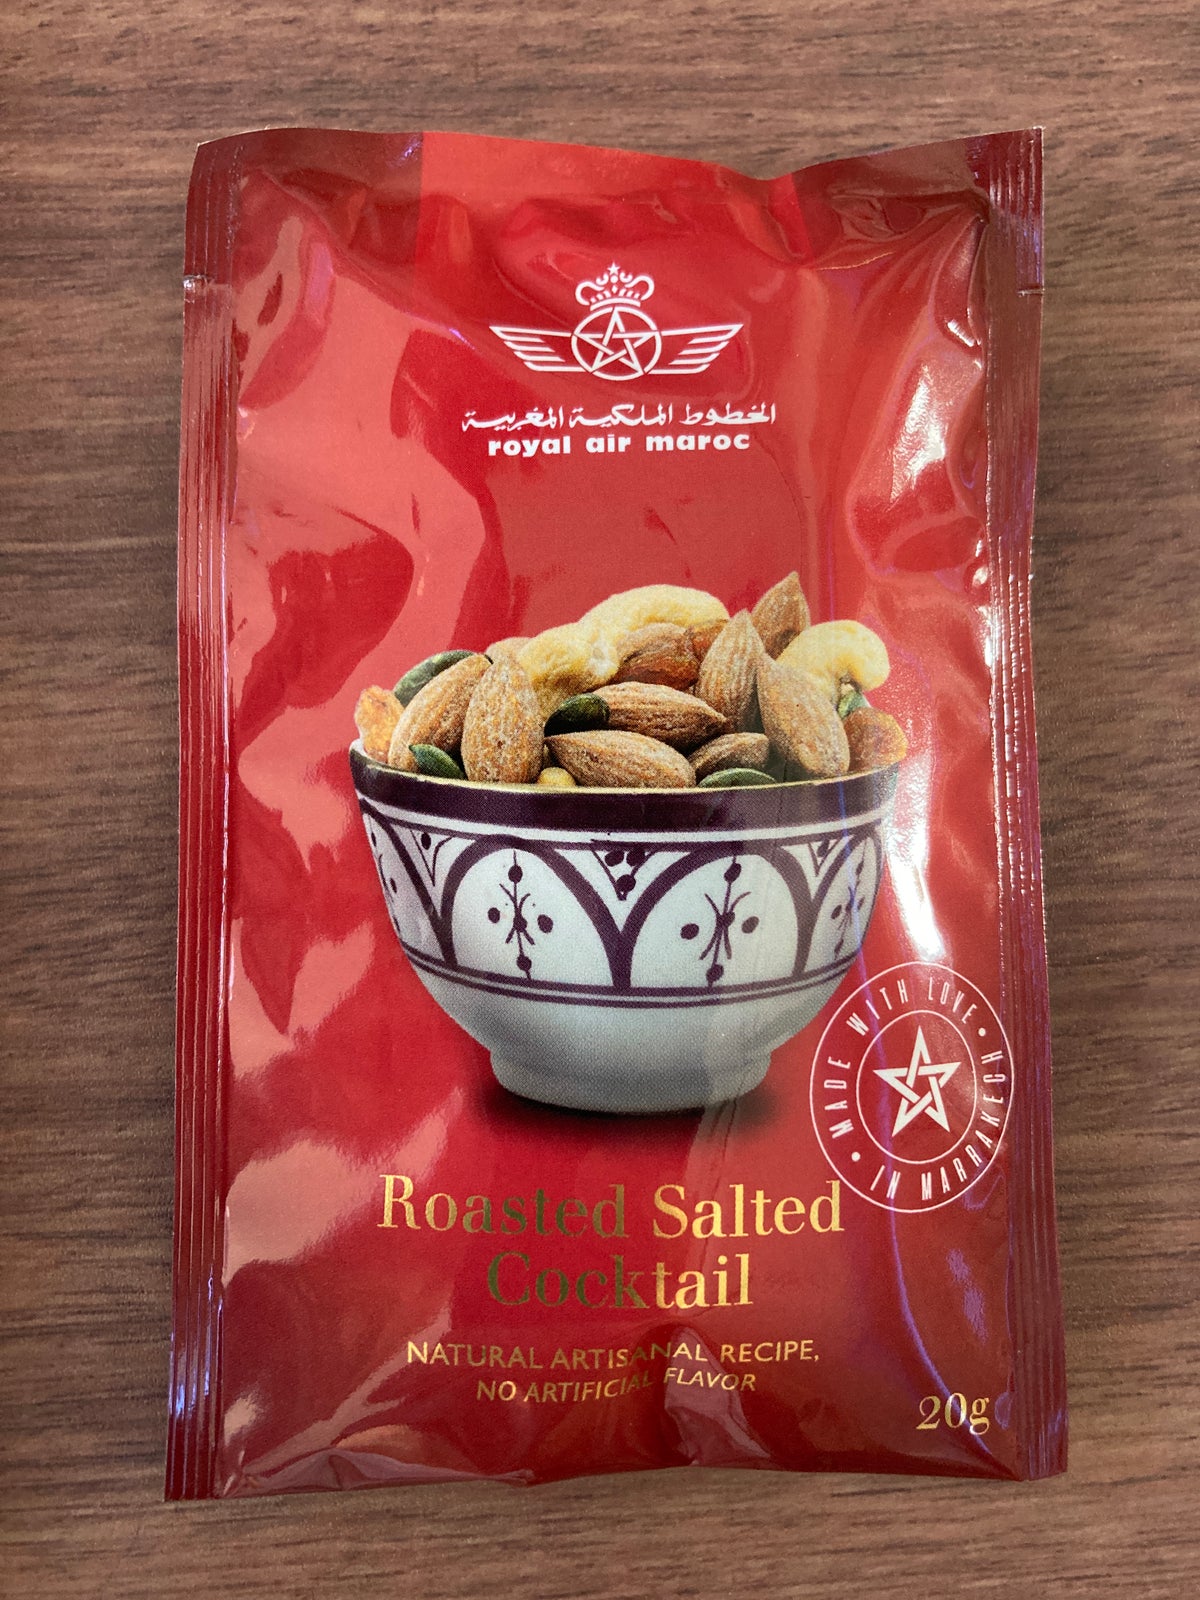 Royal Air Maroc Boeing 737 MAX 8 business class LHR CMN pack of nuts